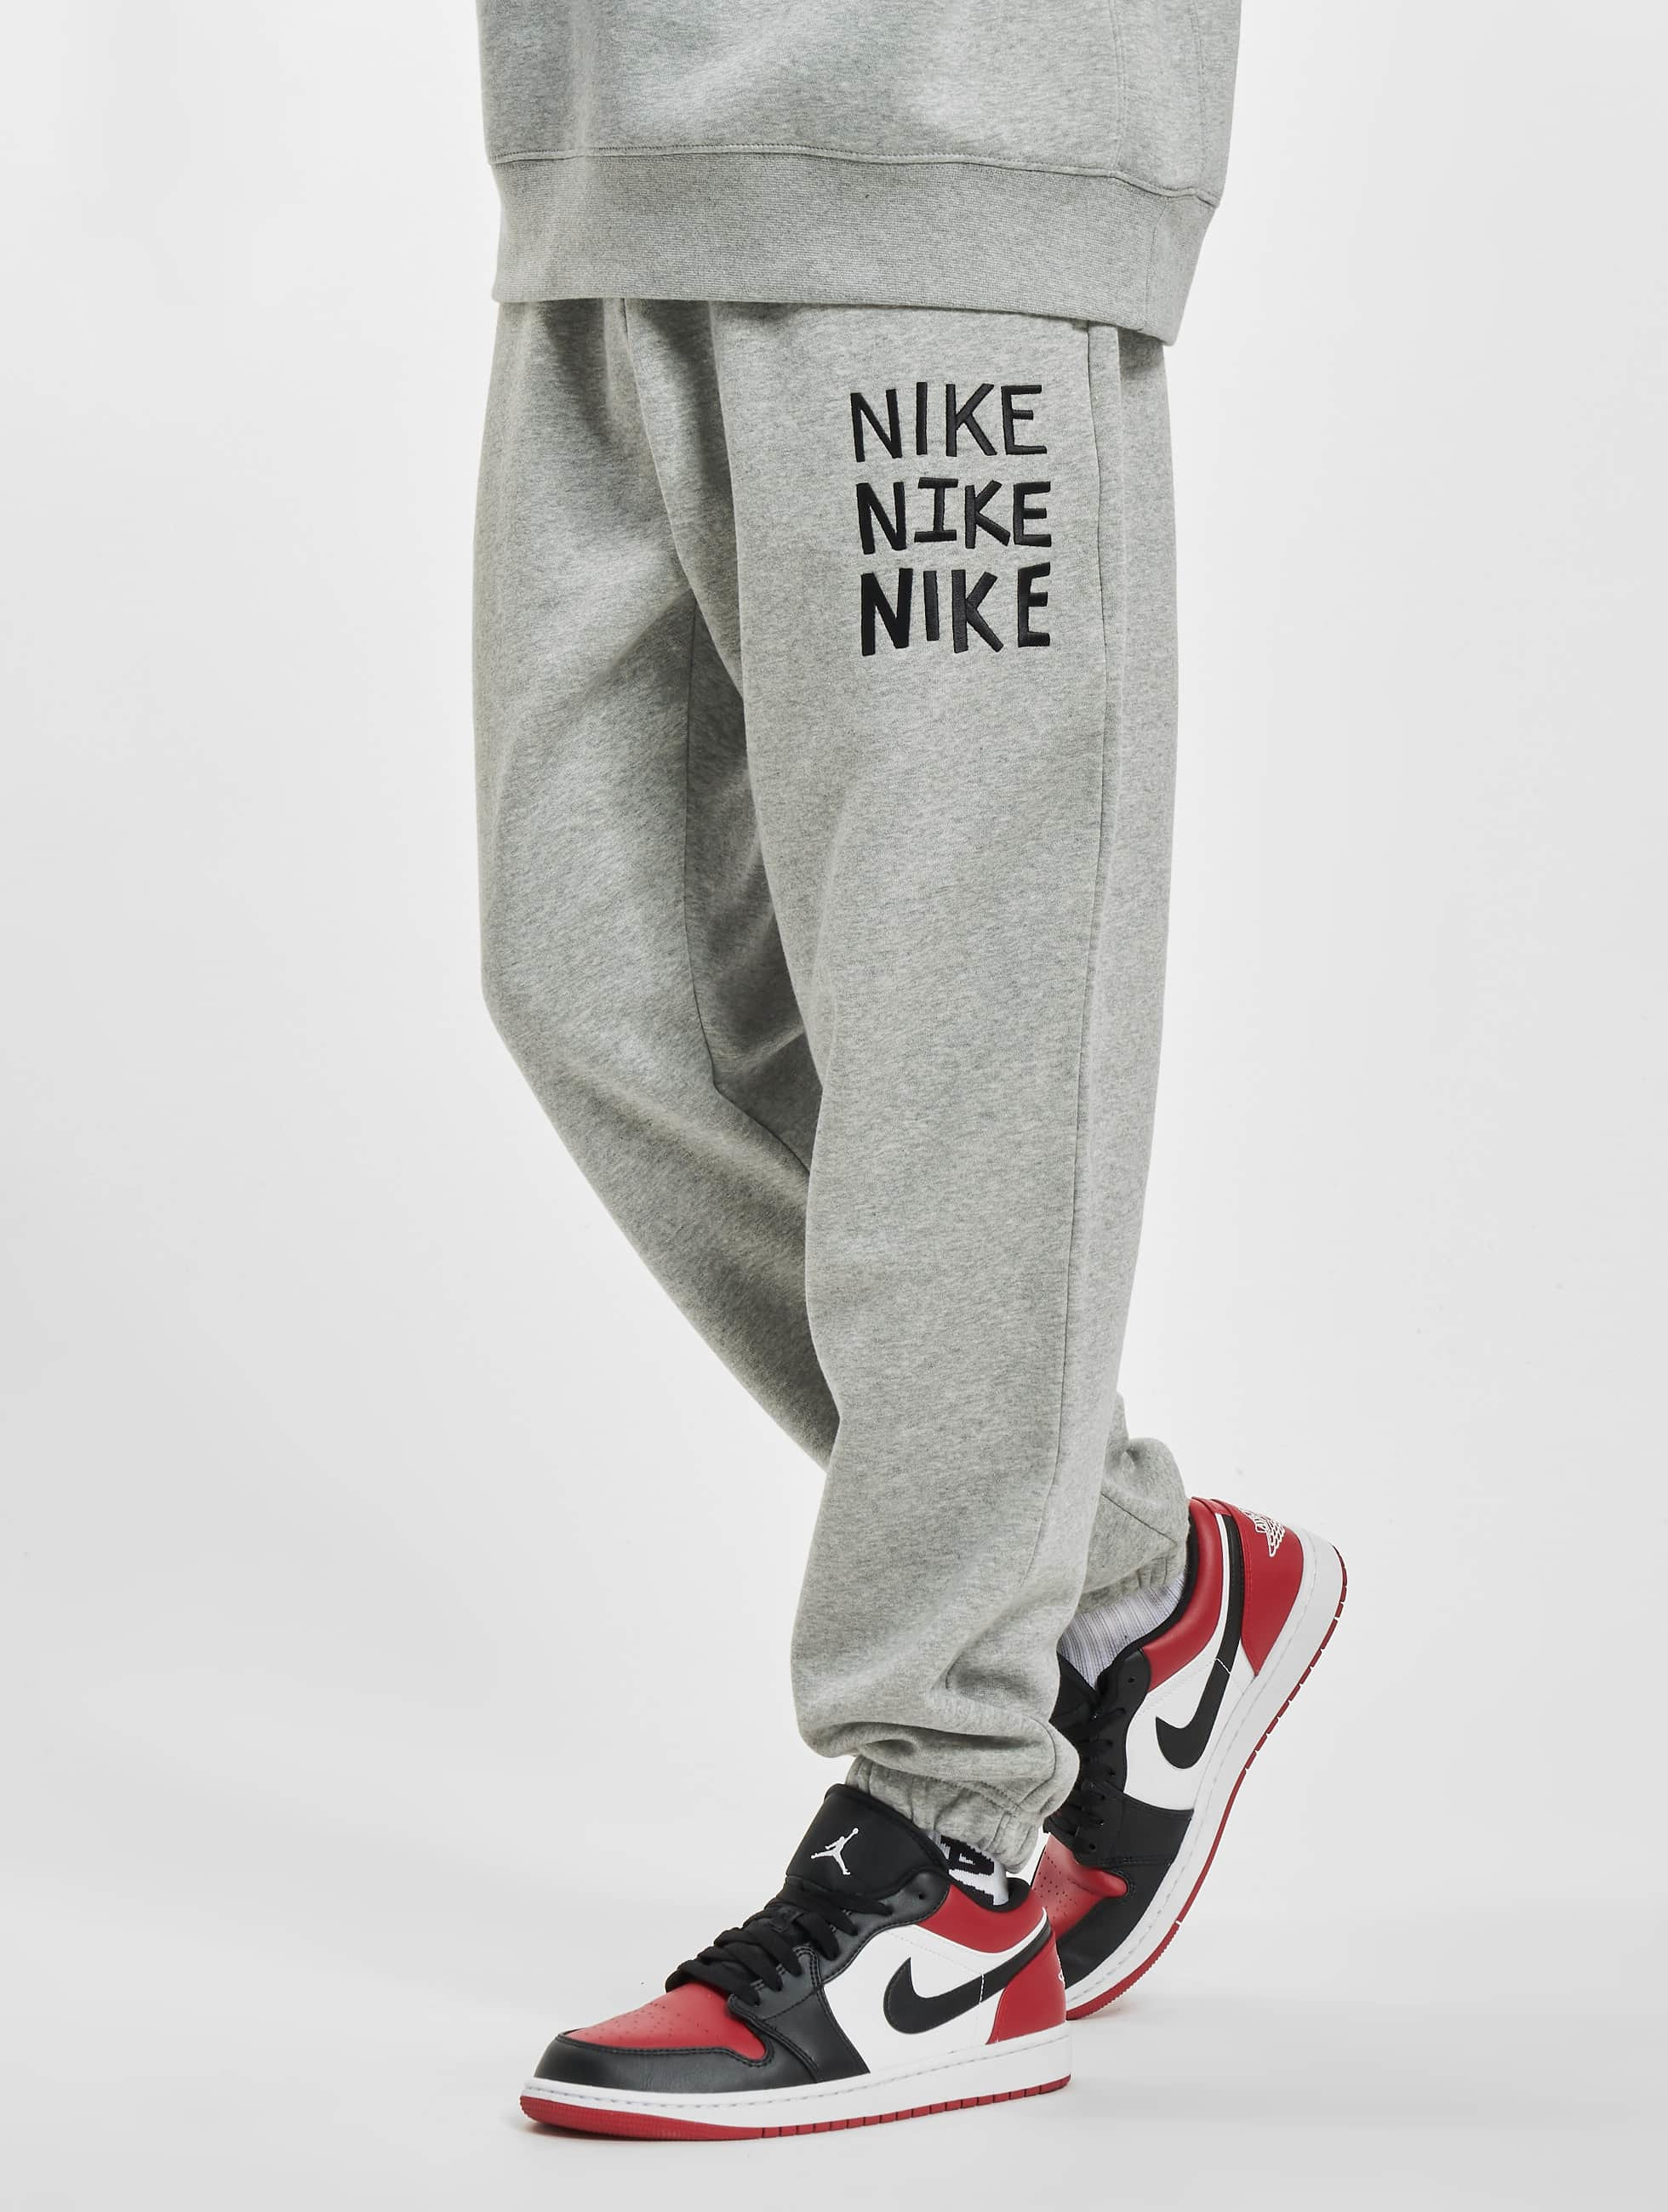 nike mens sweat outfit